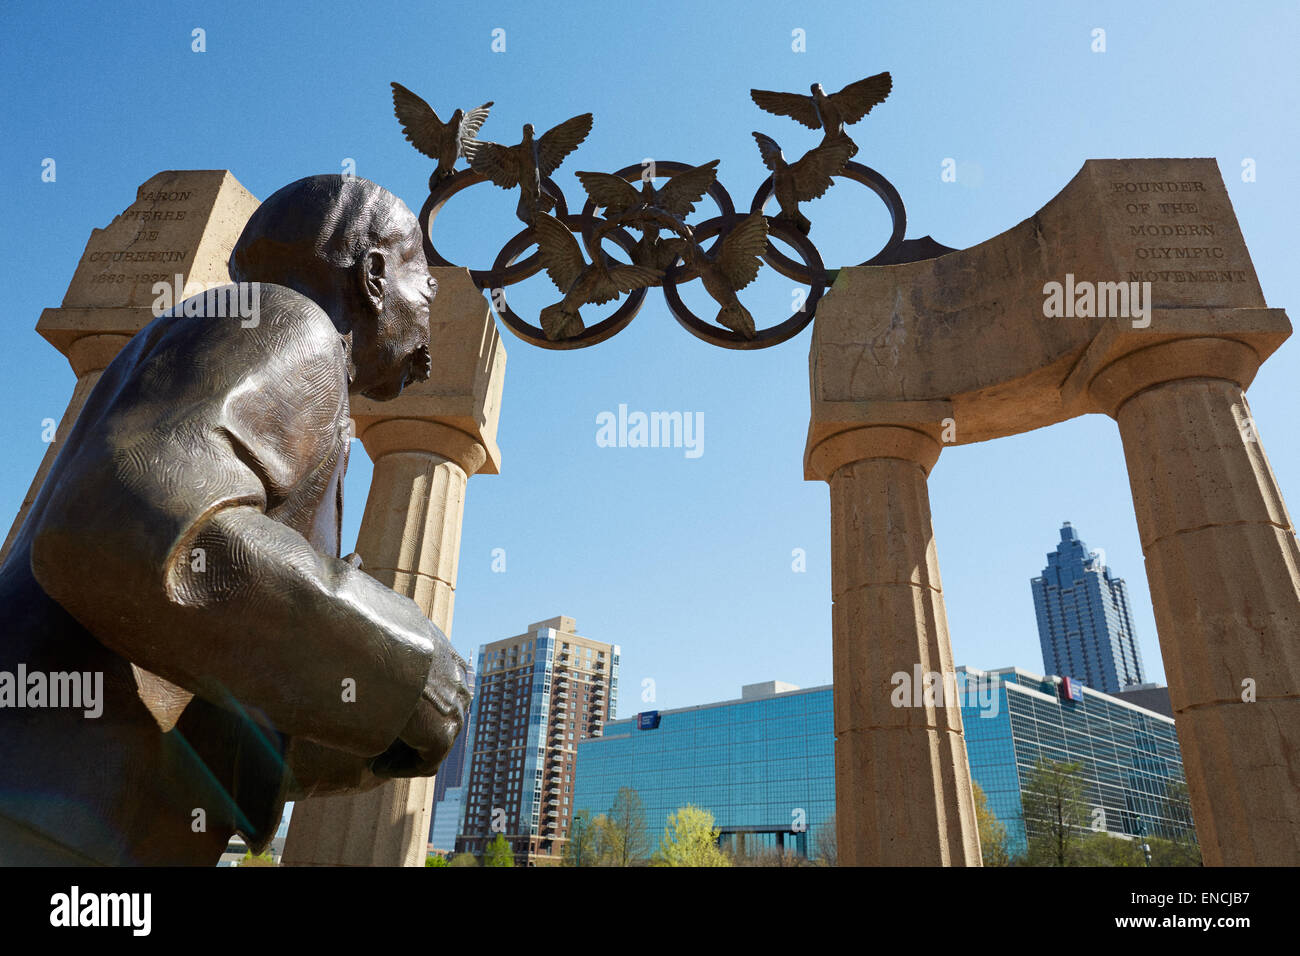 Downtown Atlanta in Georga USA   Picture: Statue of Pierre de Coubertin and Olympic Rings, doves at Centennial Olympic Park Stock Photo